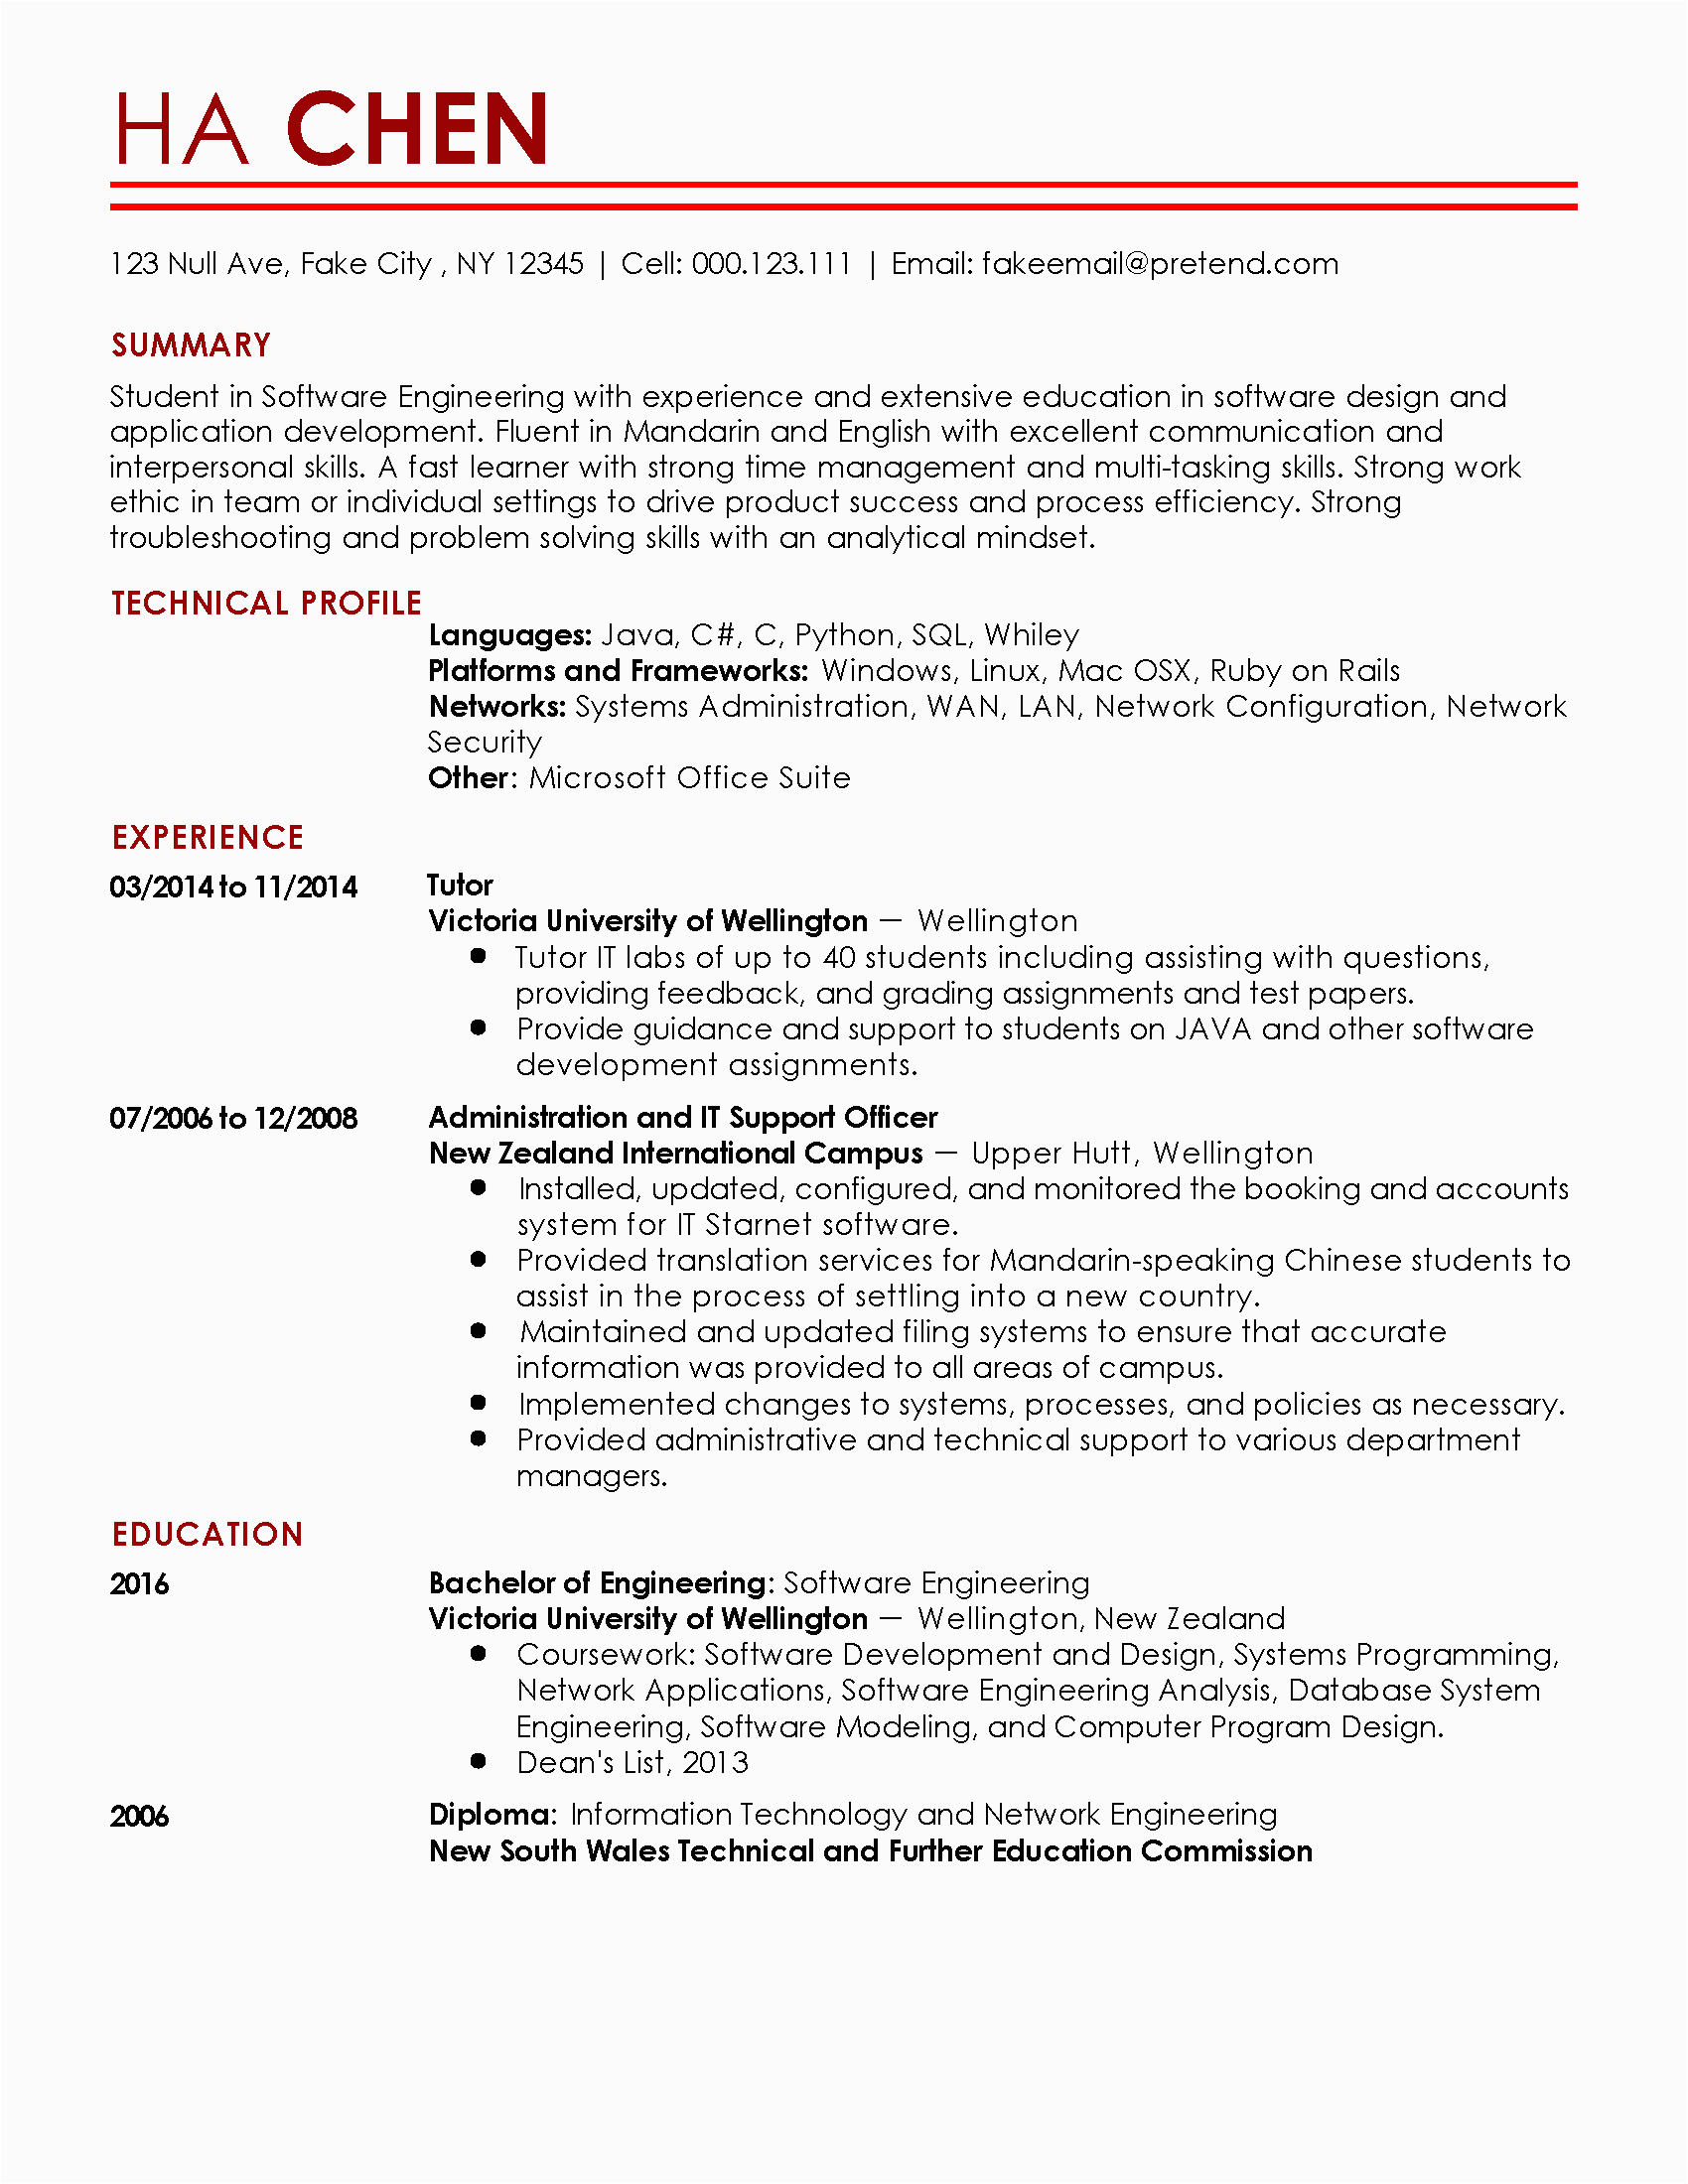 Sample Resume software Engineer Entry Level Professional Entry Level software Engineer Templates to